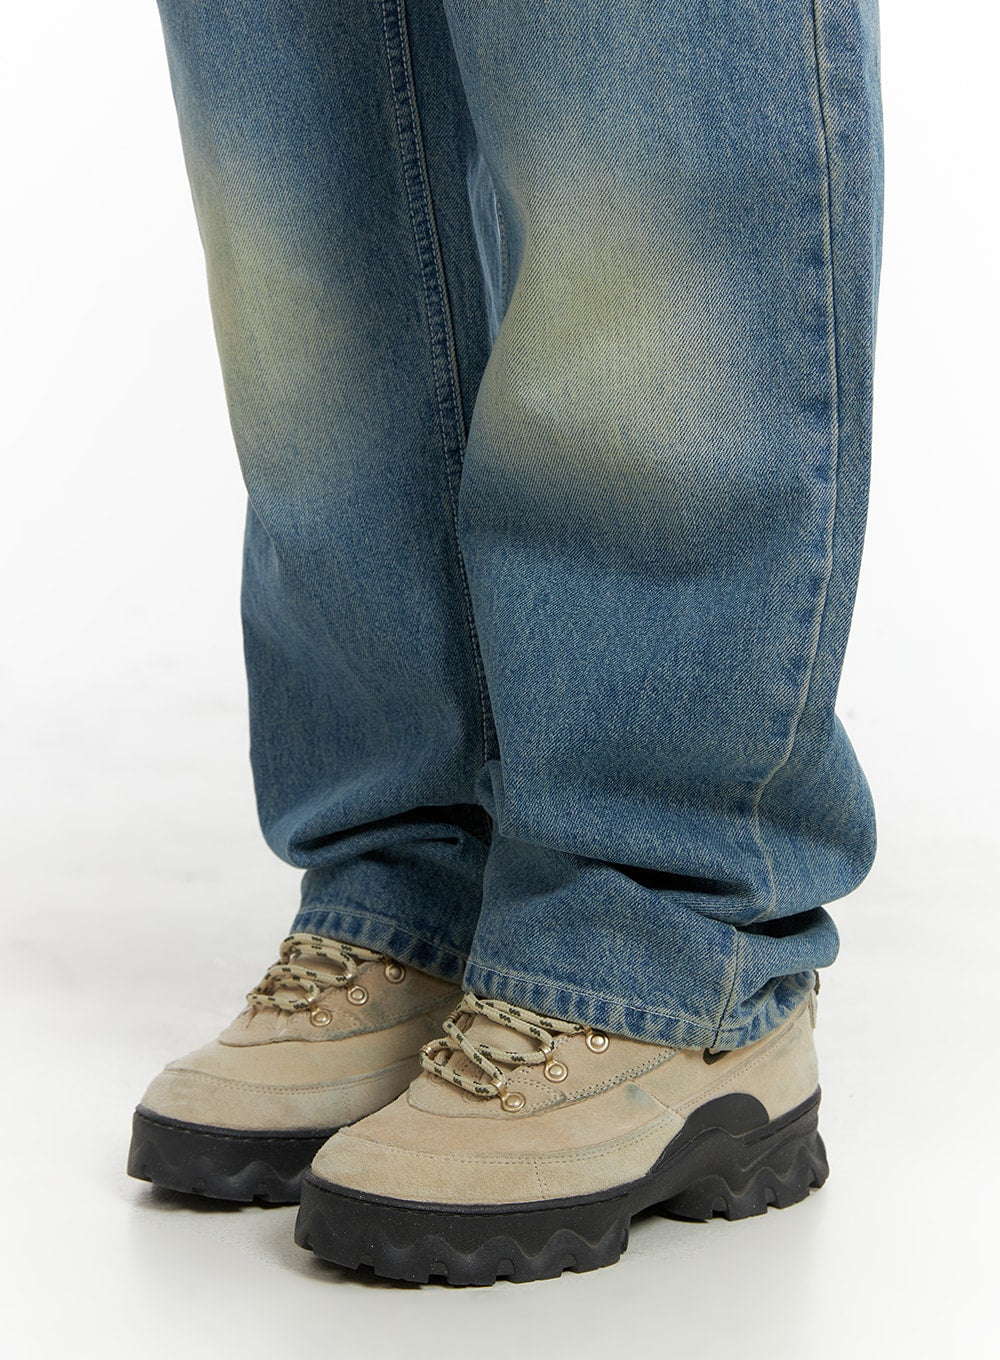 recycled-washed-jeans-unisex-cm425